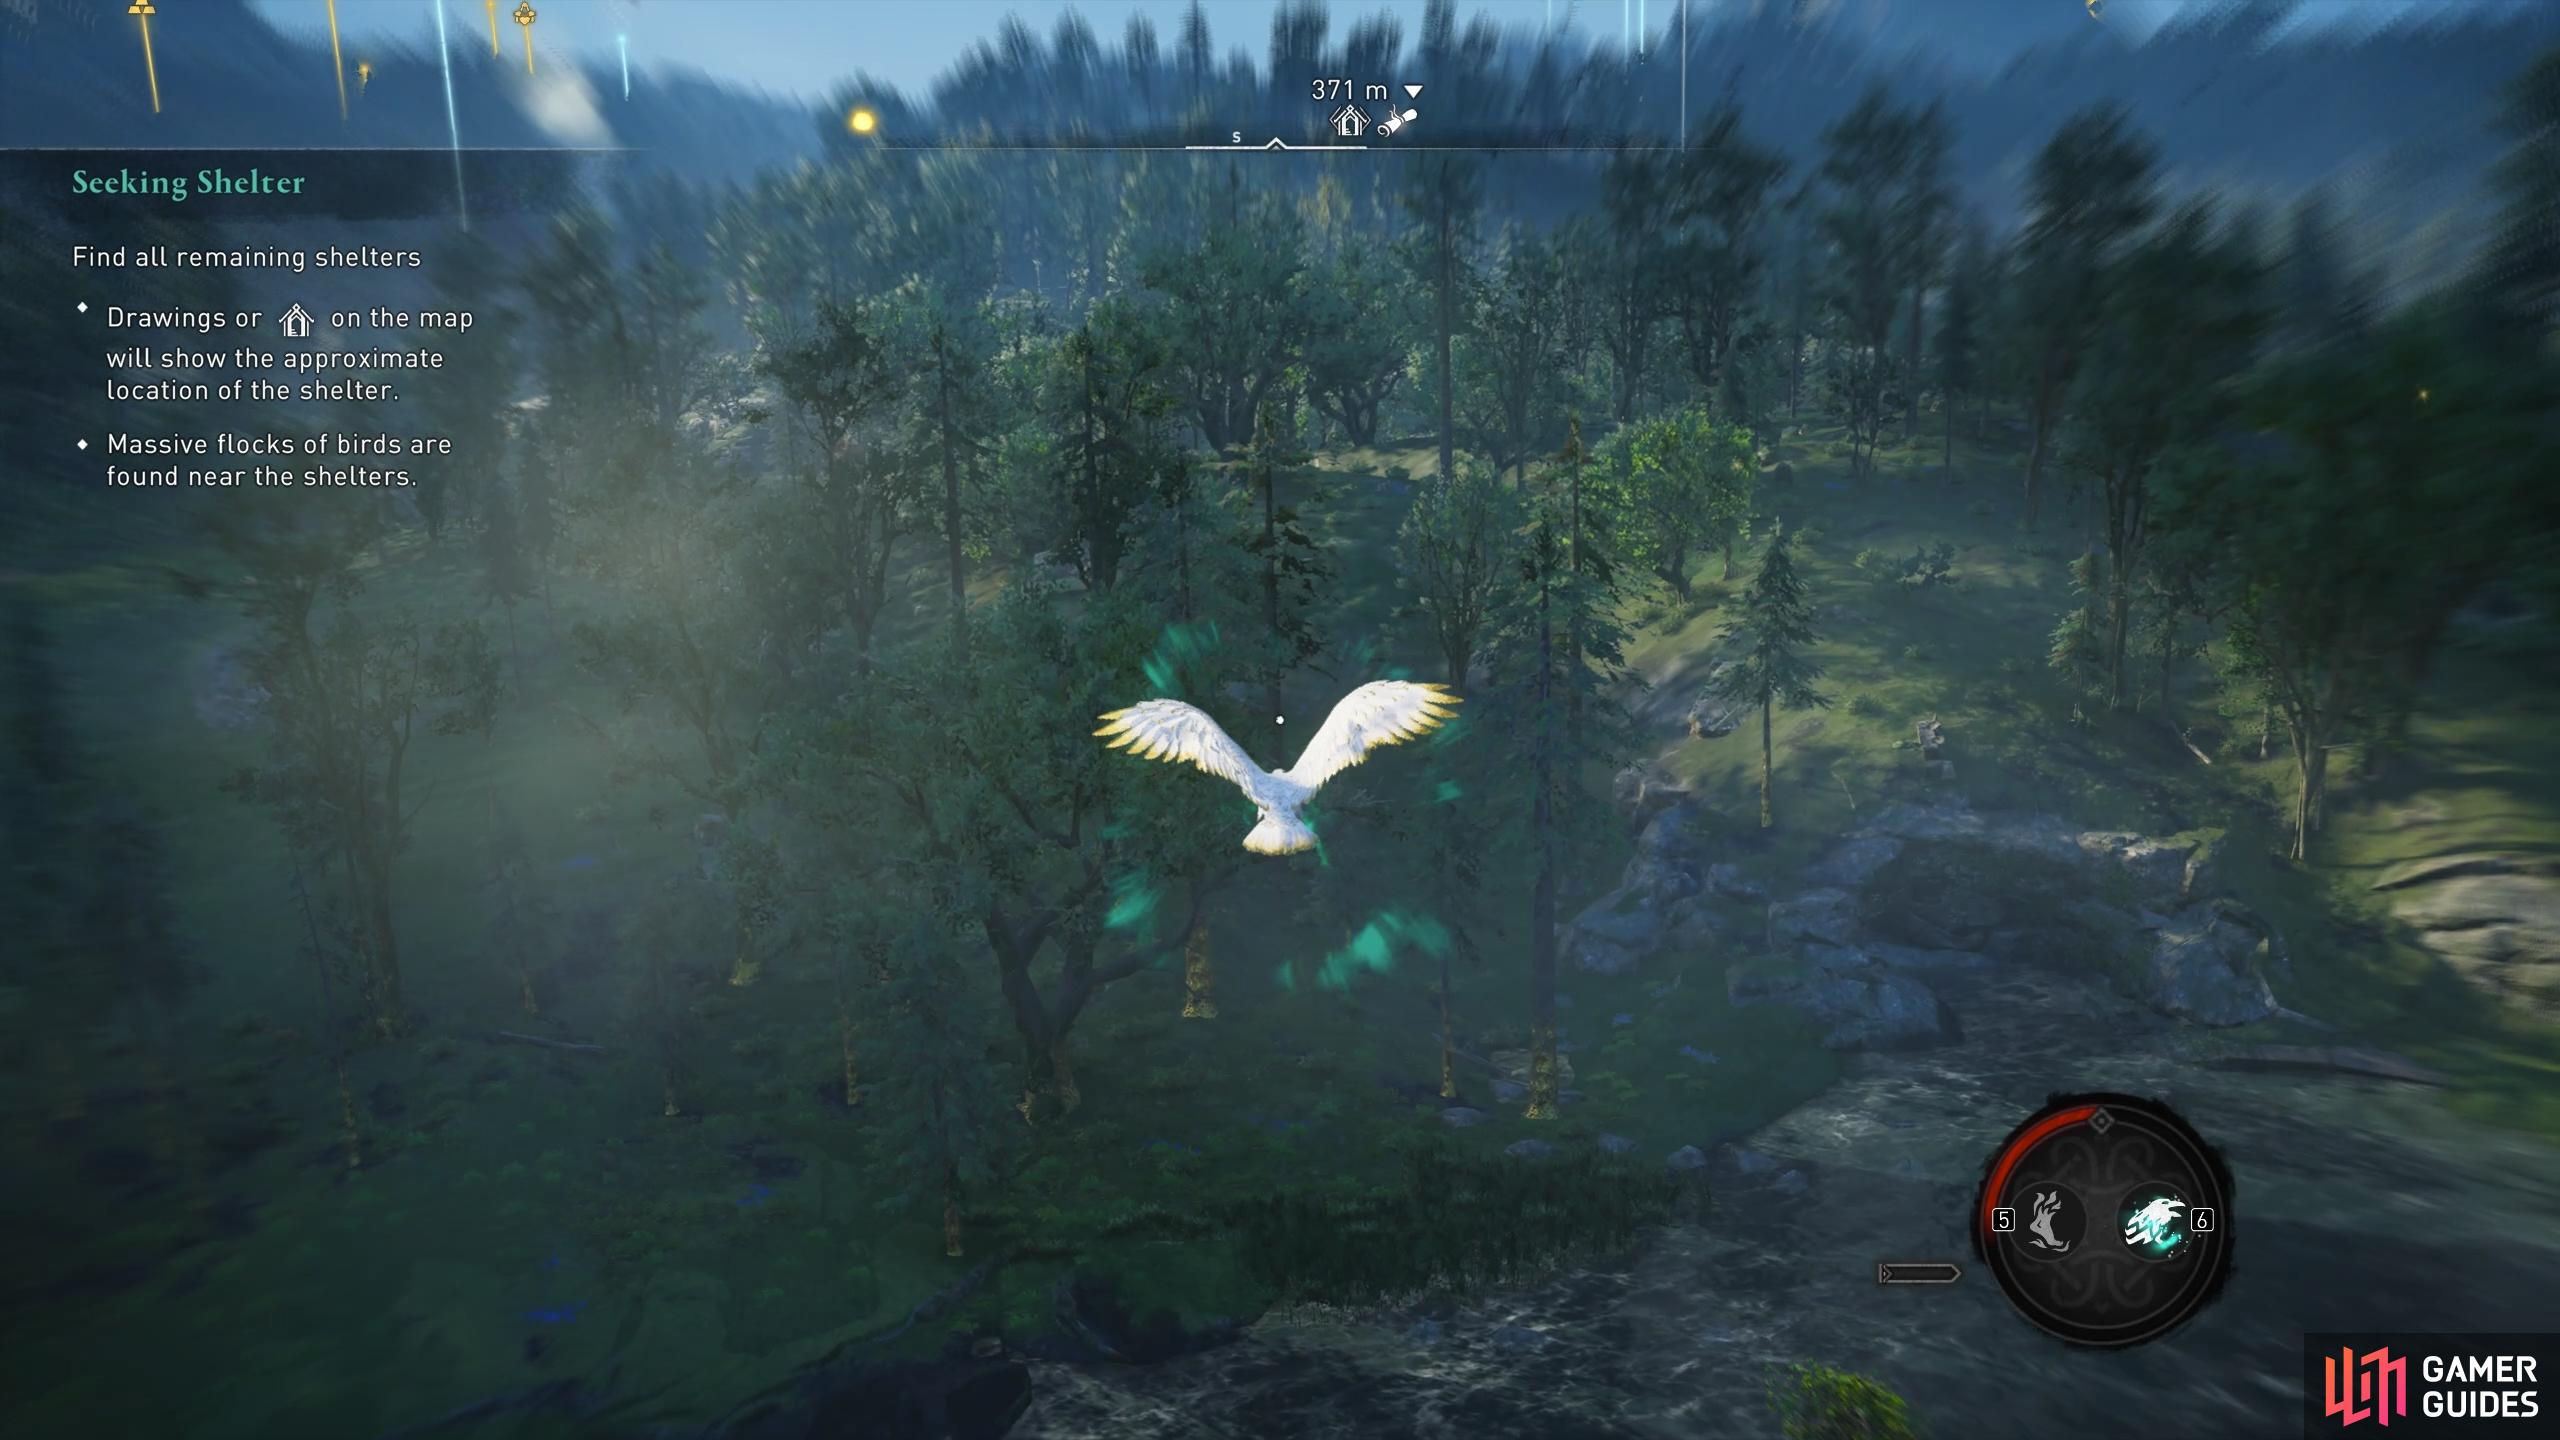 Use the Power of the Raven to fly over the small lake from the synchronization point.